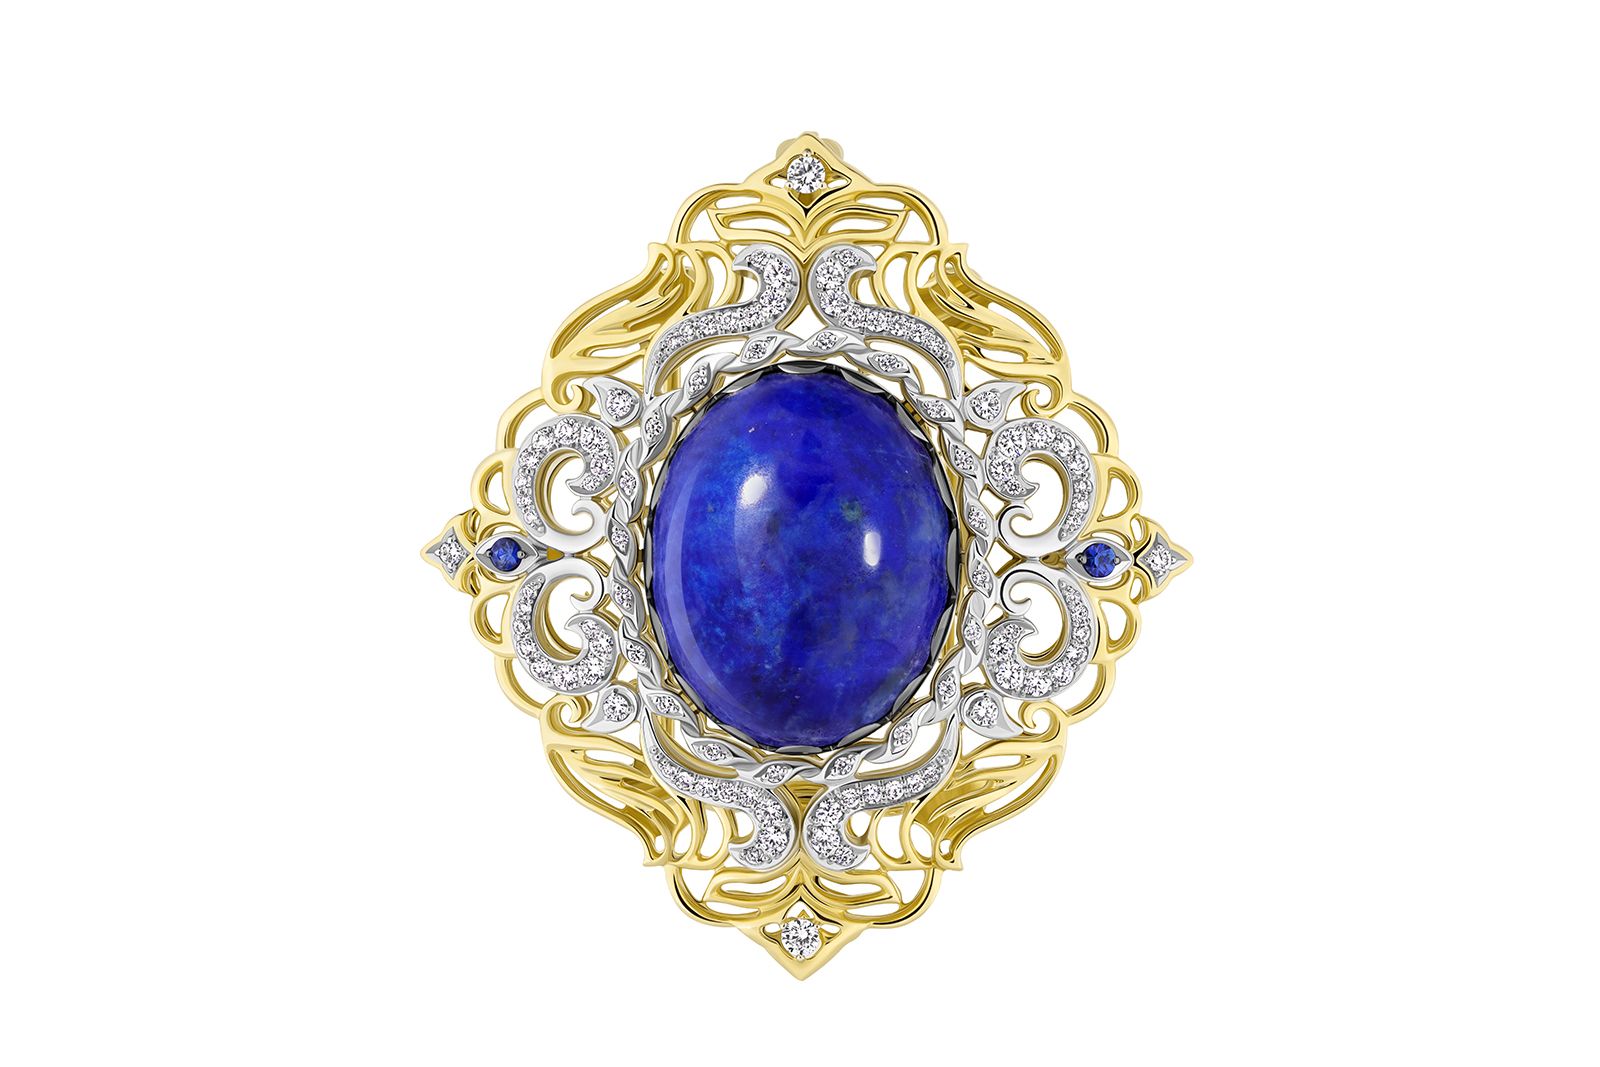 Chamovskikh gold, diamond and lapis lazuli brooch from the 'Jewels of the Imperials' collection, presented to the Grand Duchess, Maria Vladimirovna Romanova